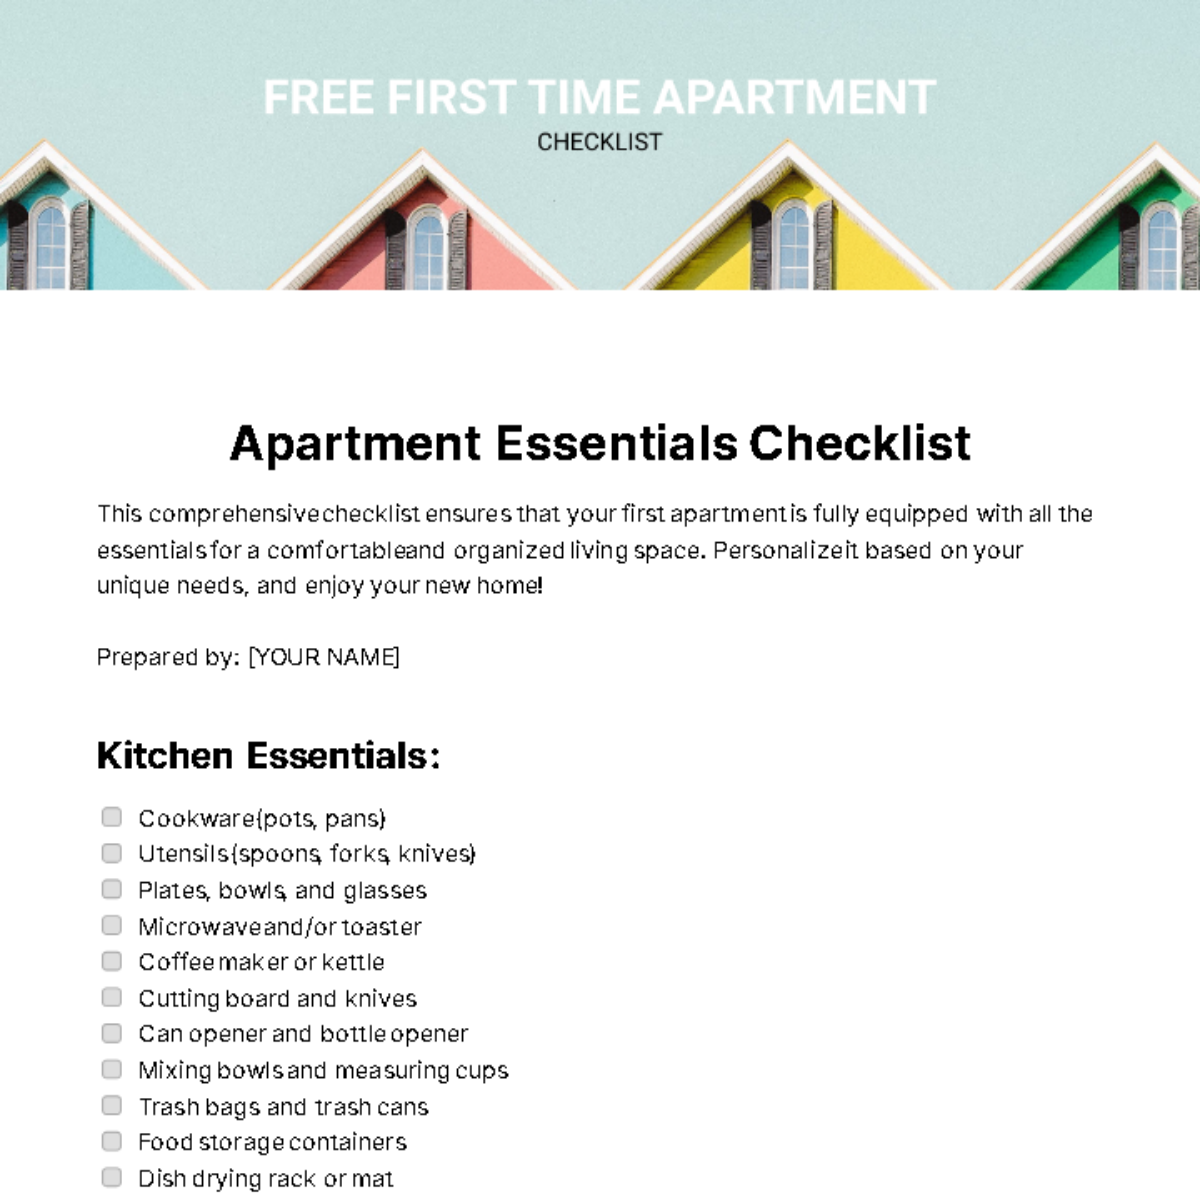 Free First Time Apartment Checklist Template